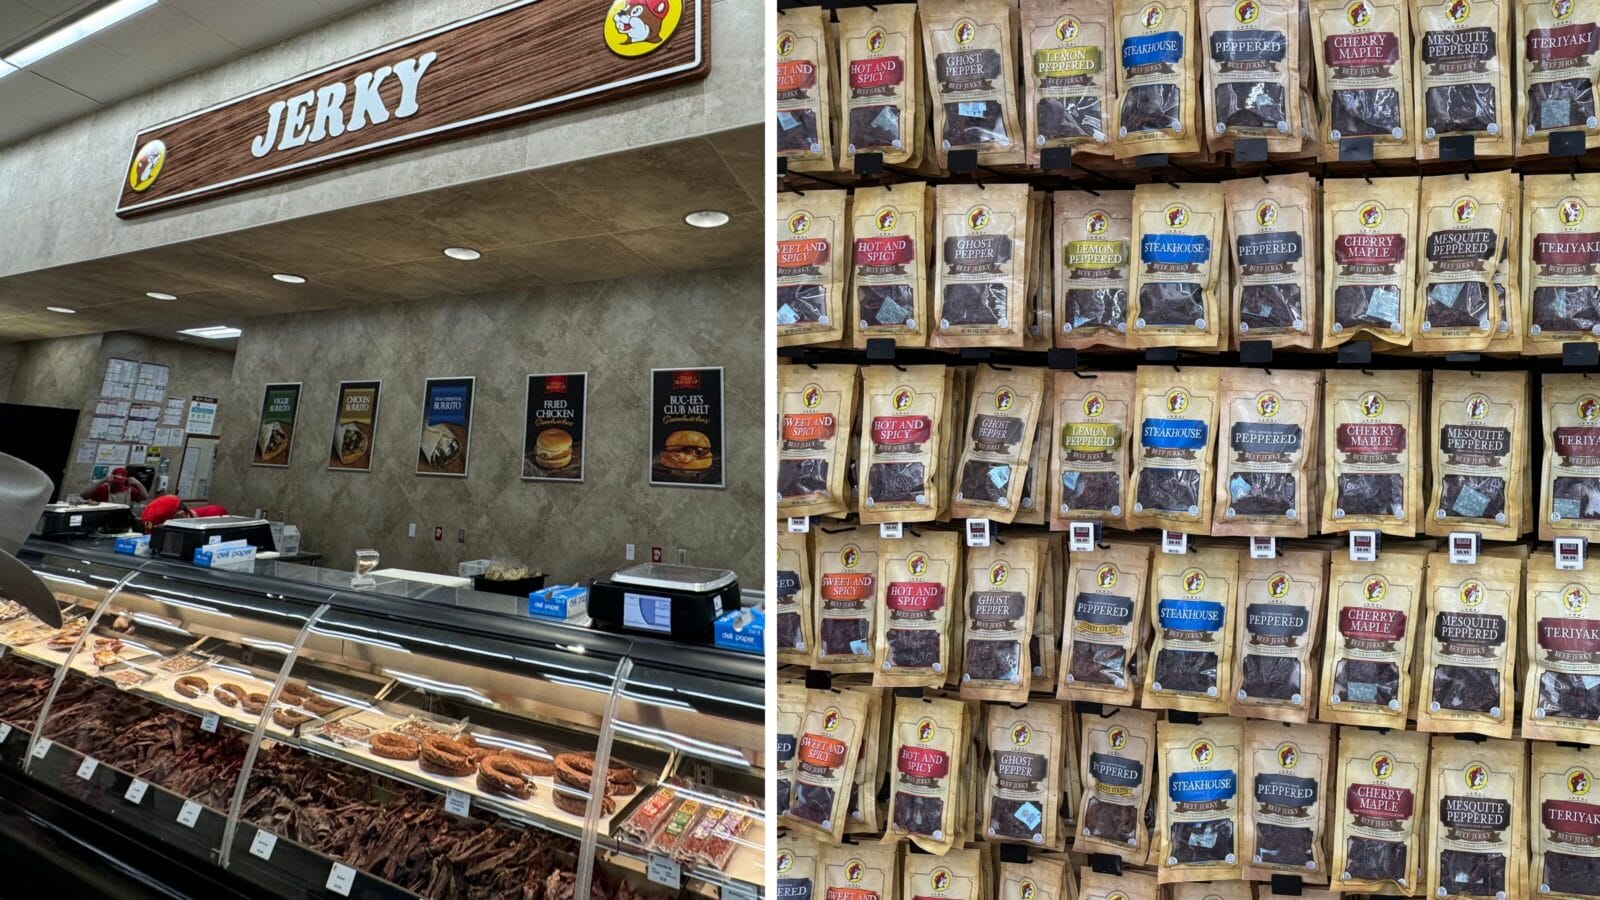 <p>Jerky is the most plentiful item in the store. You will find not only a wall of jerky but also a pile of jerky at a counter near the bakery to order jerky by the pound. The sheer amount of dehydrated meat and endless flavors is impressive. </p>